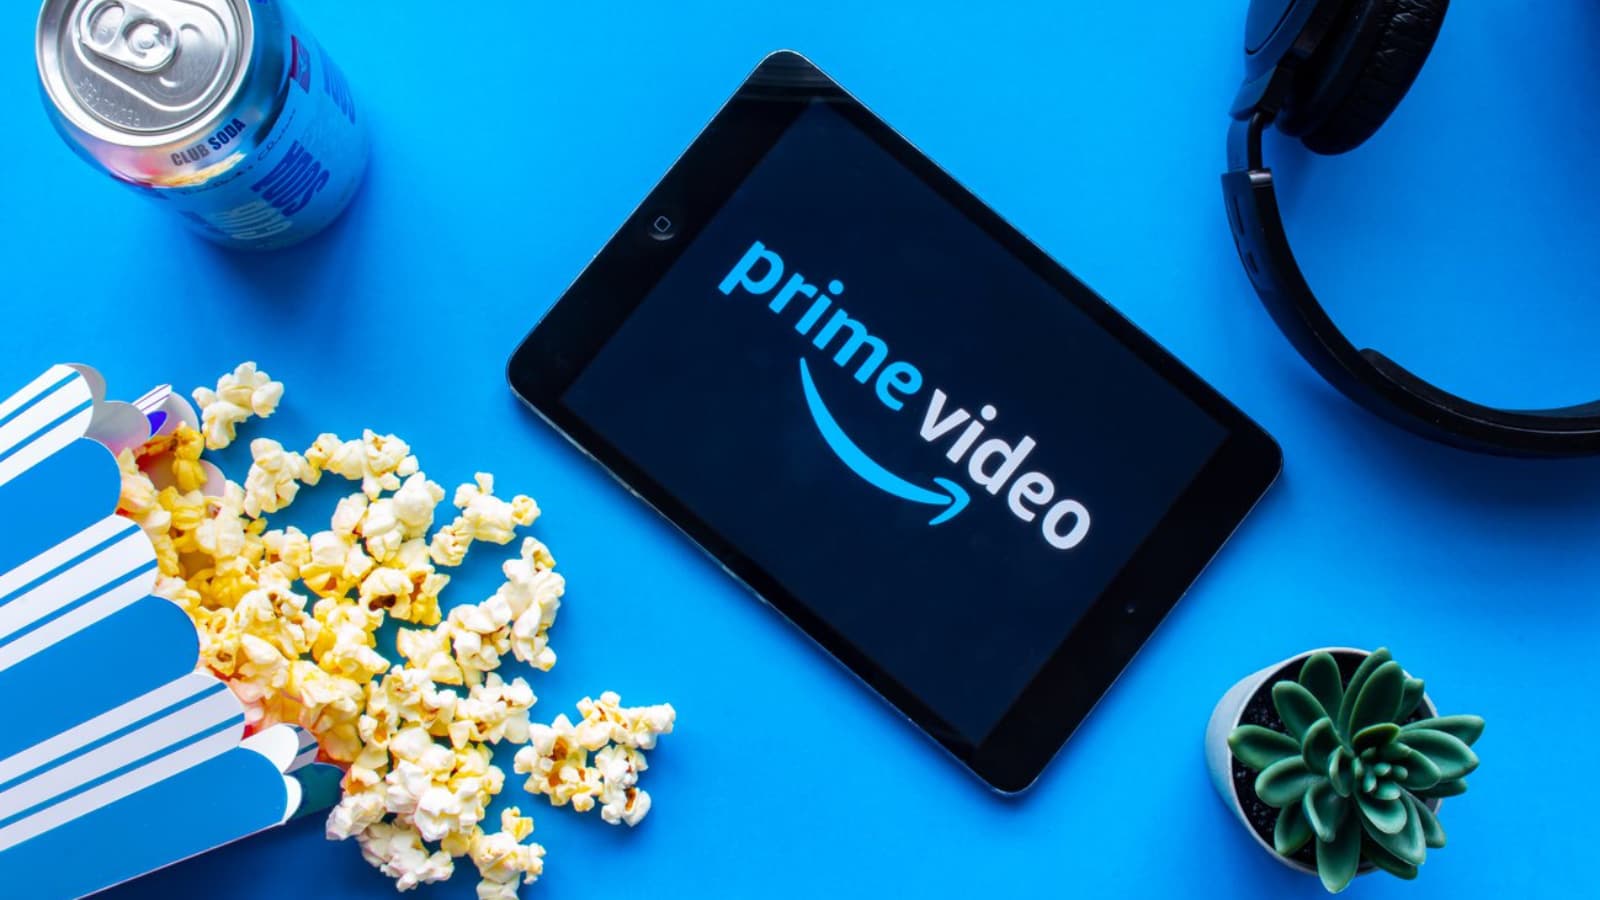 How To Watch Amazon Prime On A Tablet